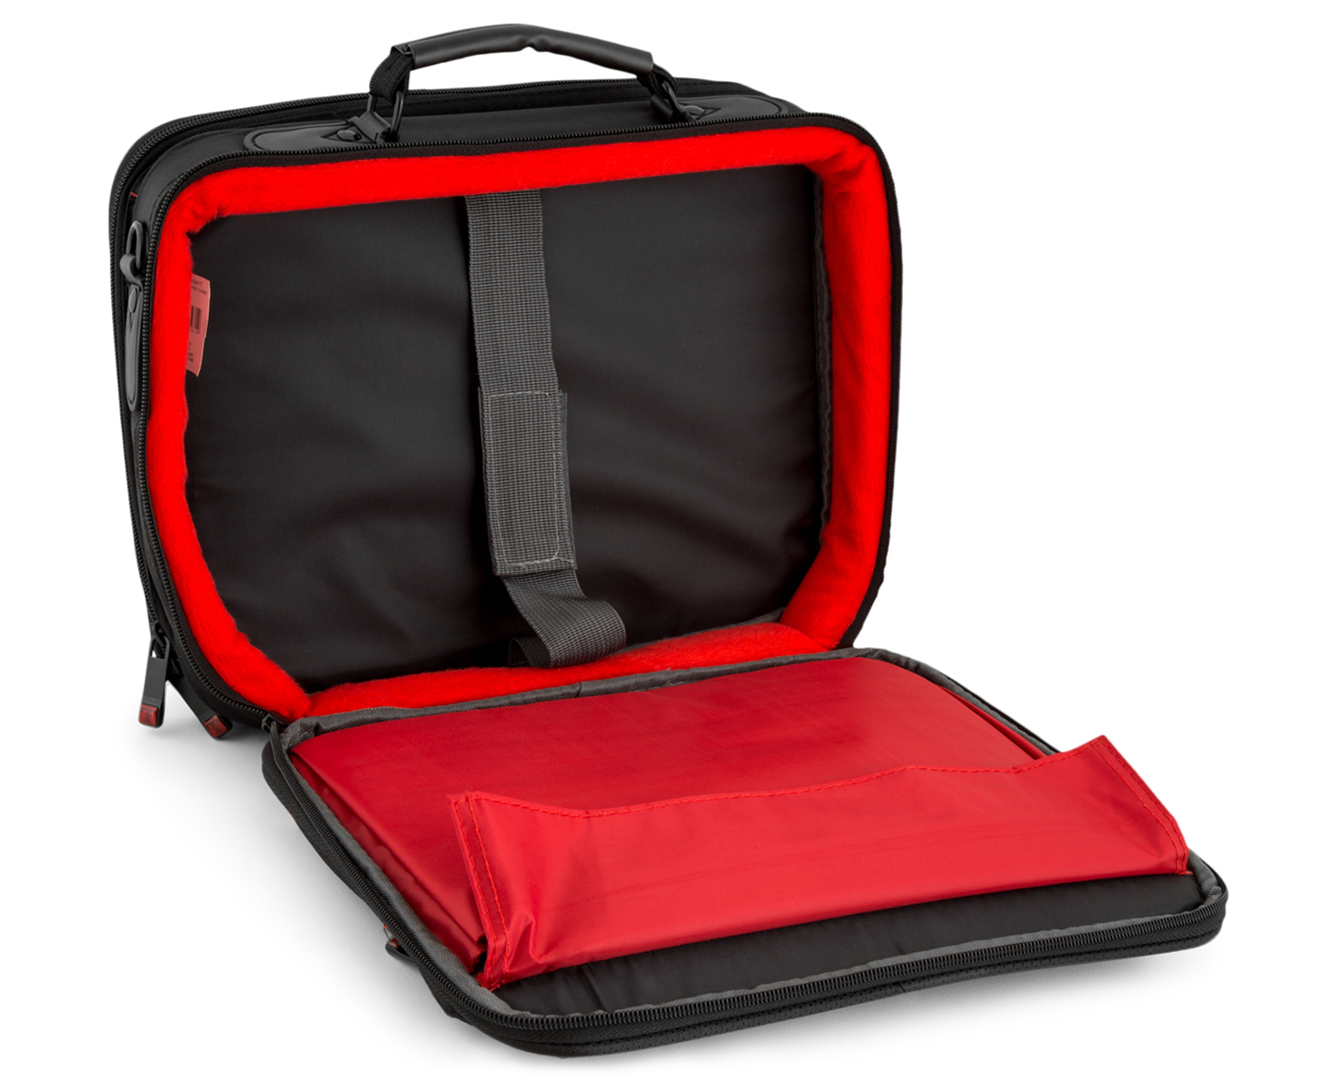 Tosca Lightweight Collection 10-Inch Laptop Bag - Black/Red | Catch.co.nz